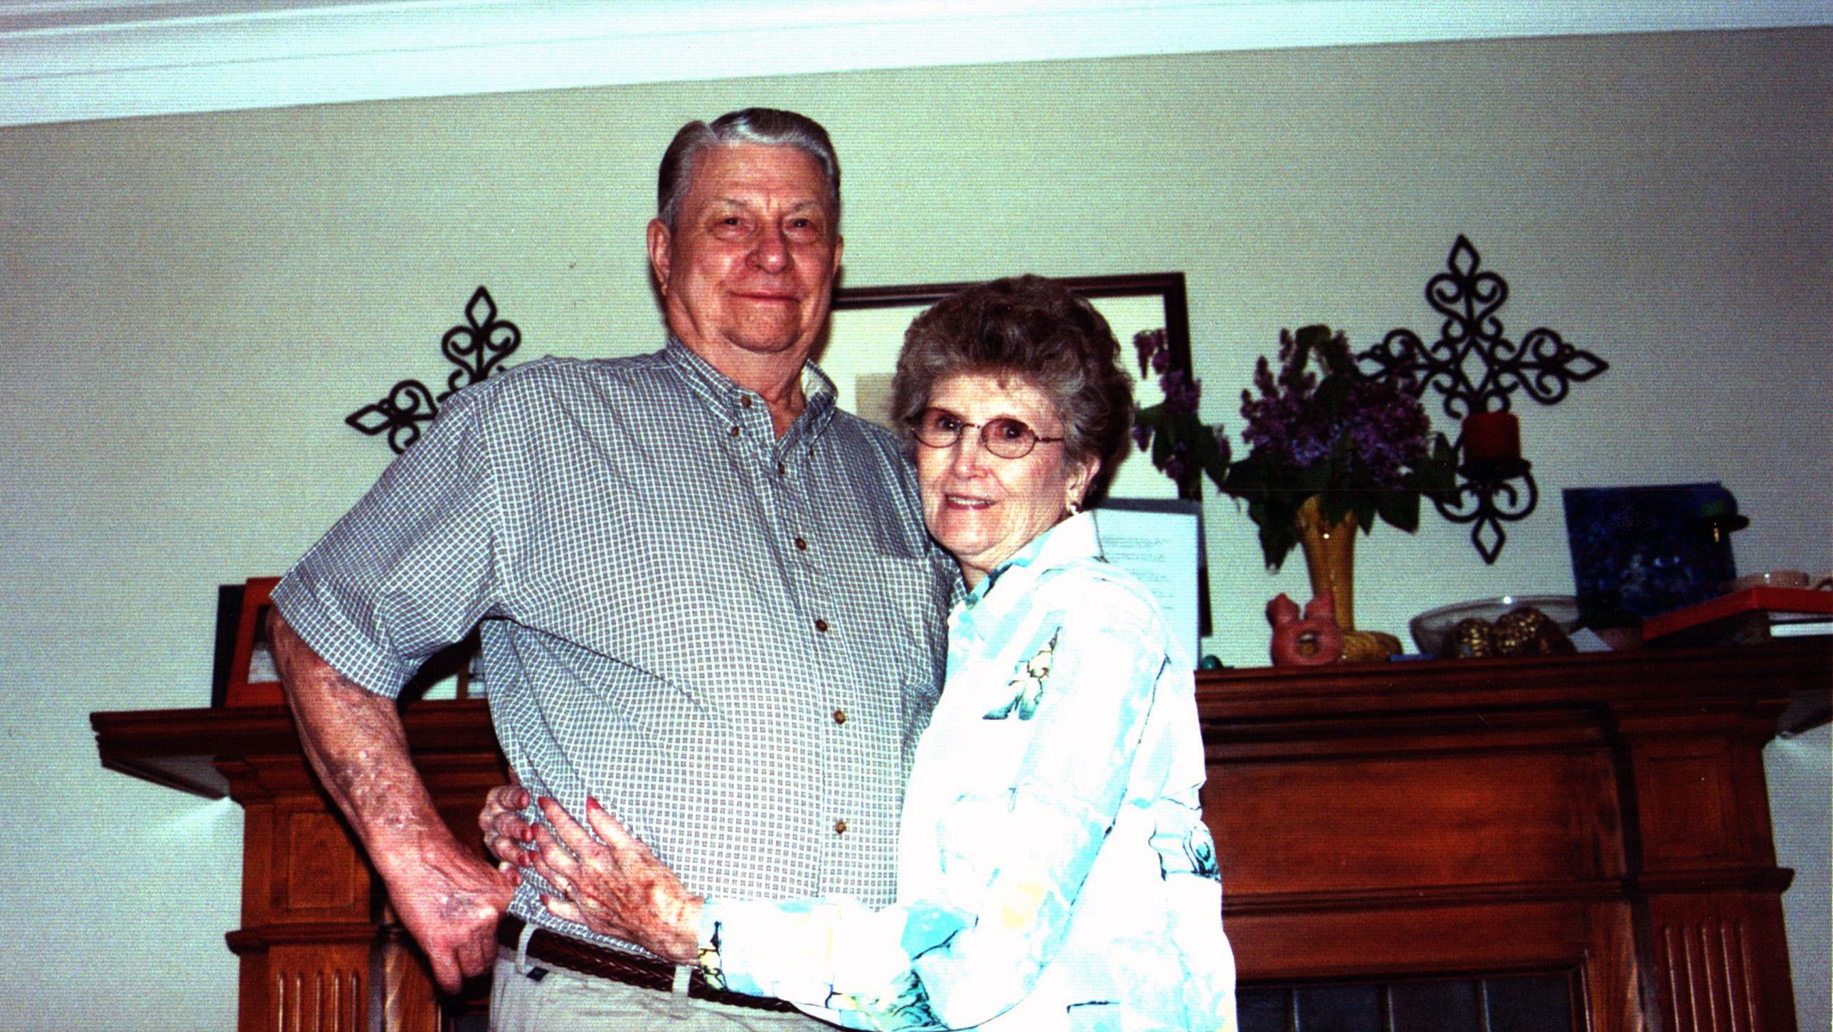 The author's parents in 2000.